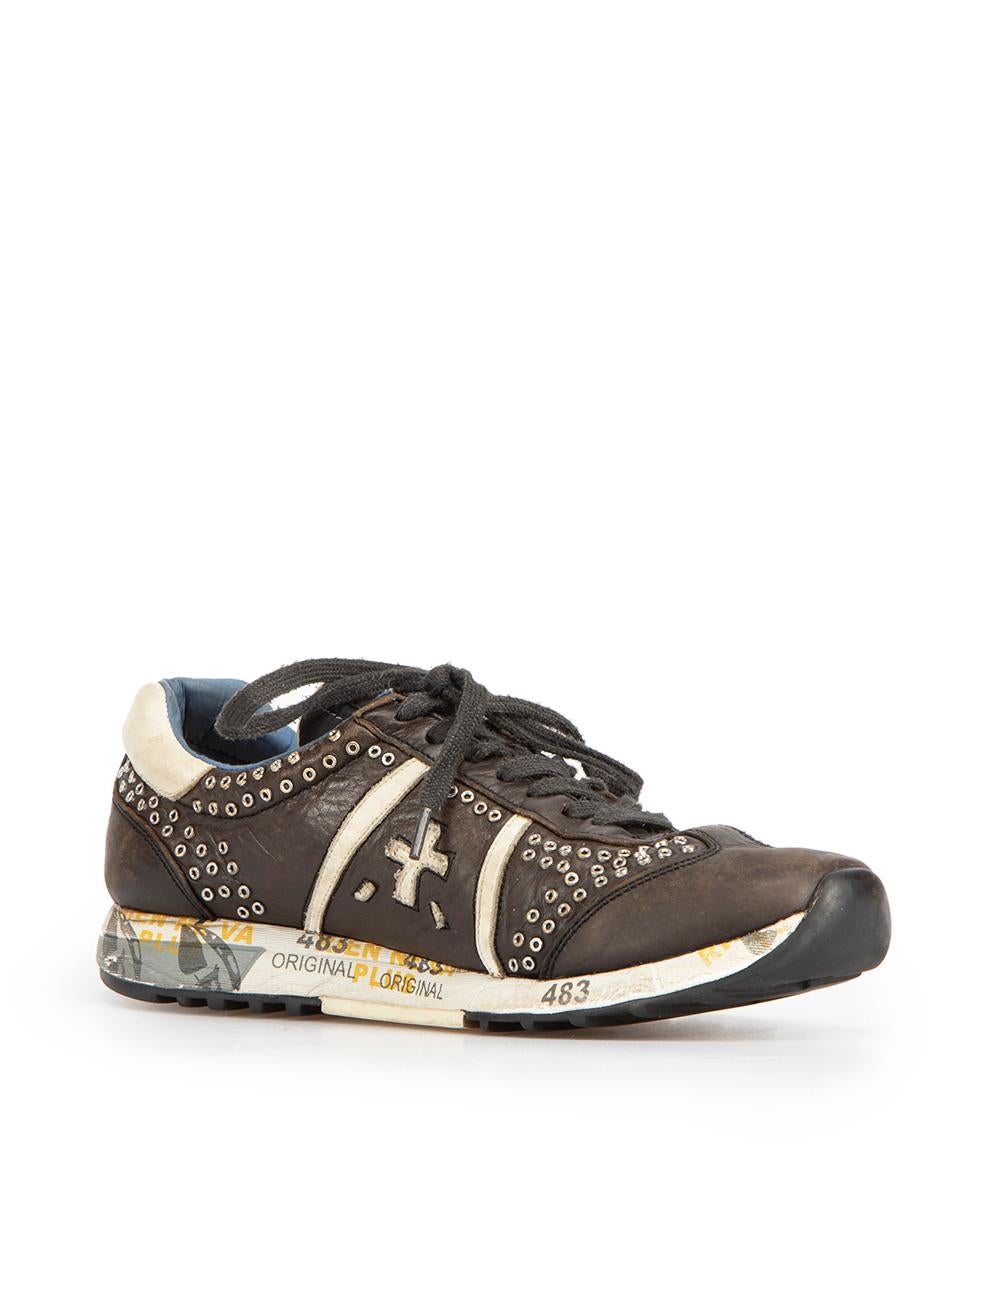 CONDITION is Good. General wear to shoes is evident. Moderate signs of wear to the front, heels, sides and doles with scuff marks on this used Premiata designer resale item. 



Details


Dark brown

Leather

Low top trainers

Distressed